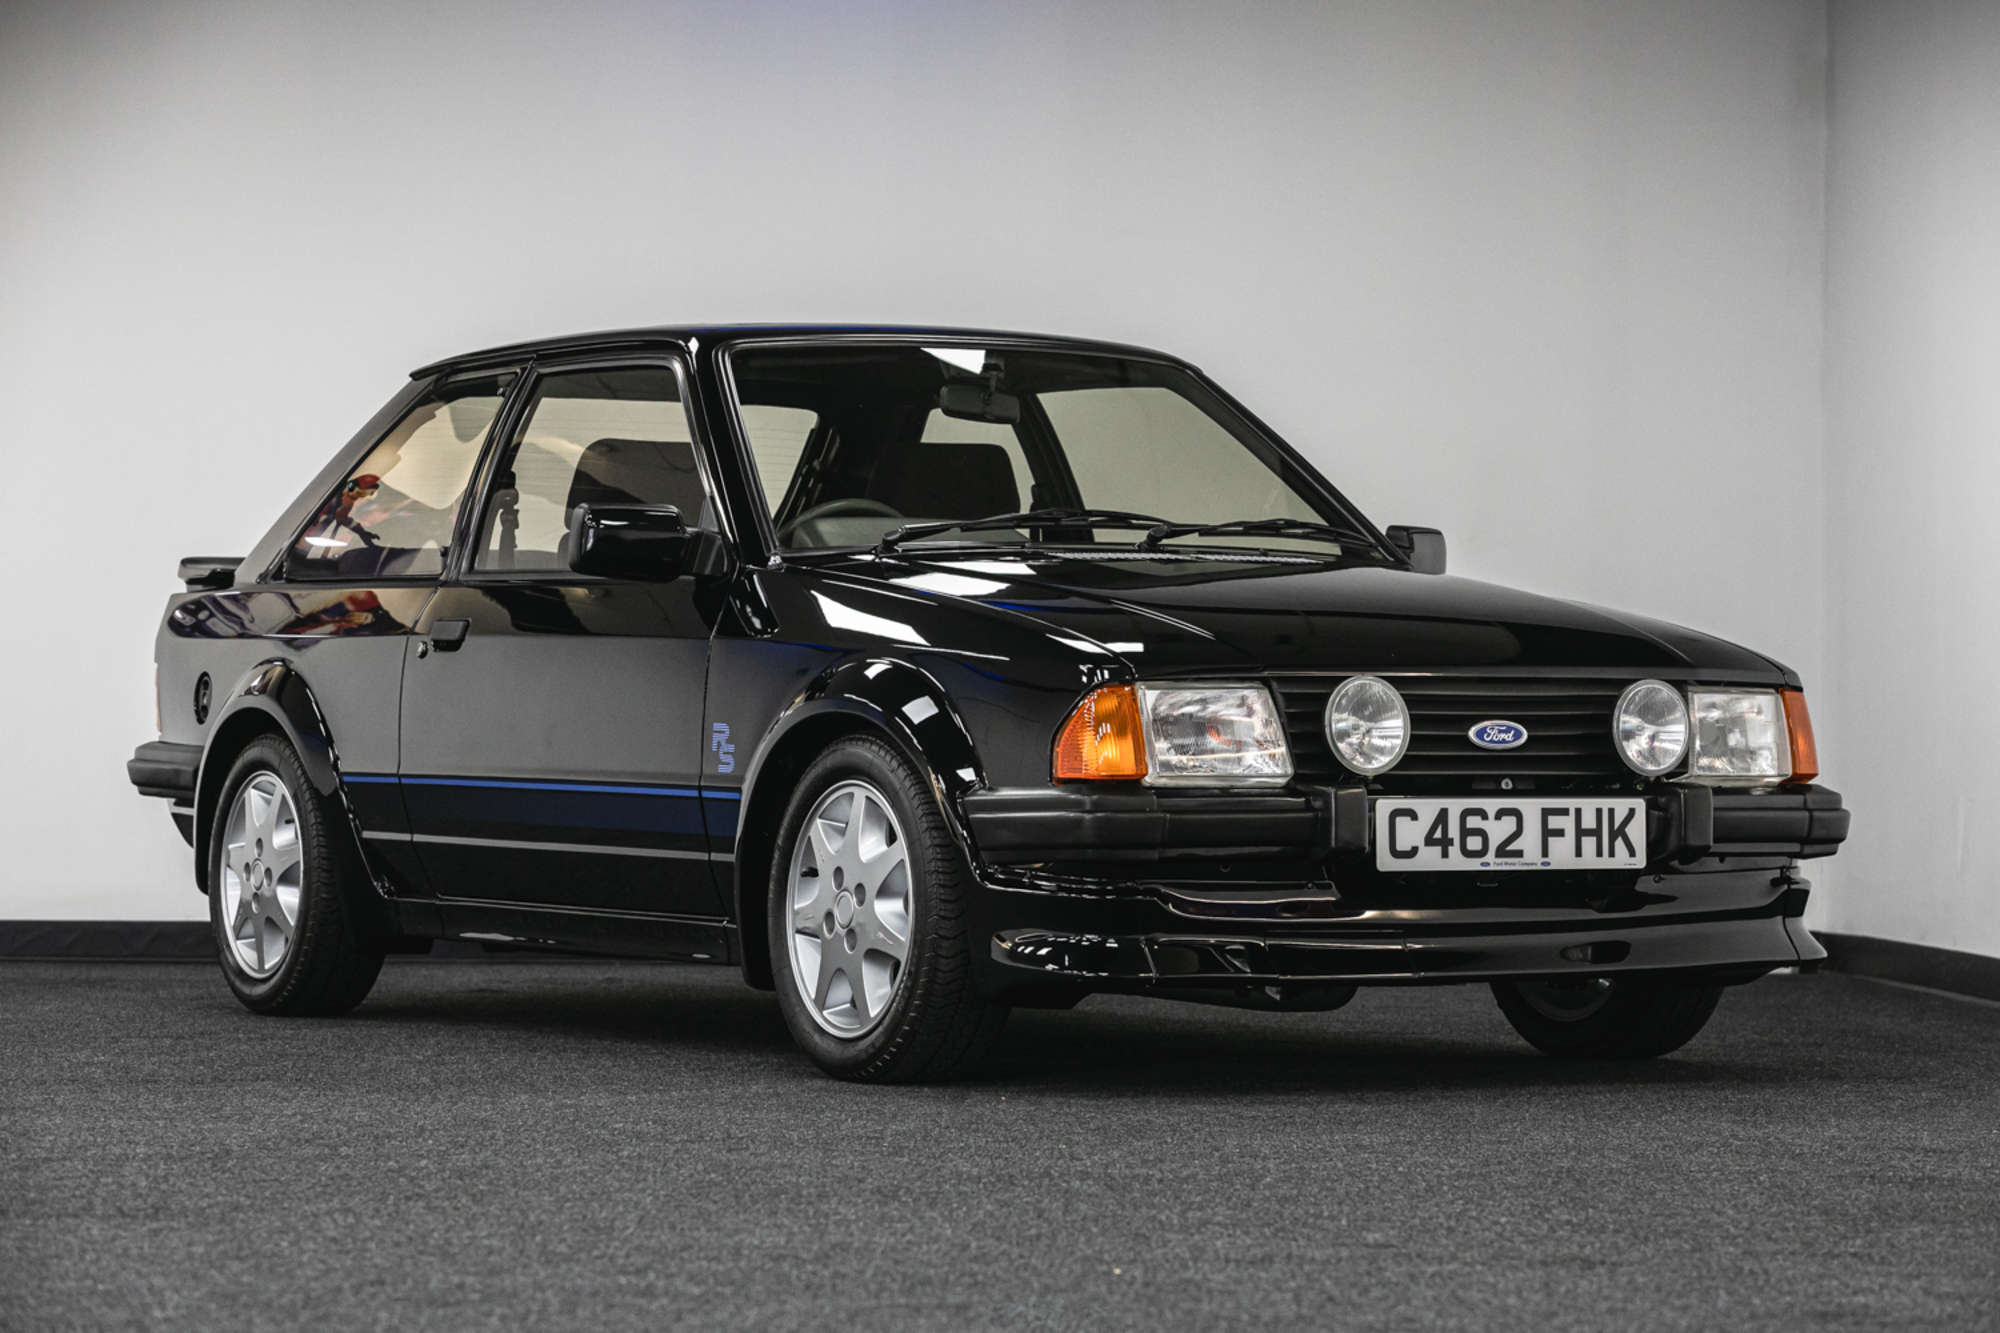 Princess Diana's Ford Escort RS Turbo sells for £725,000